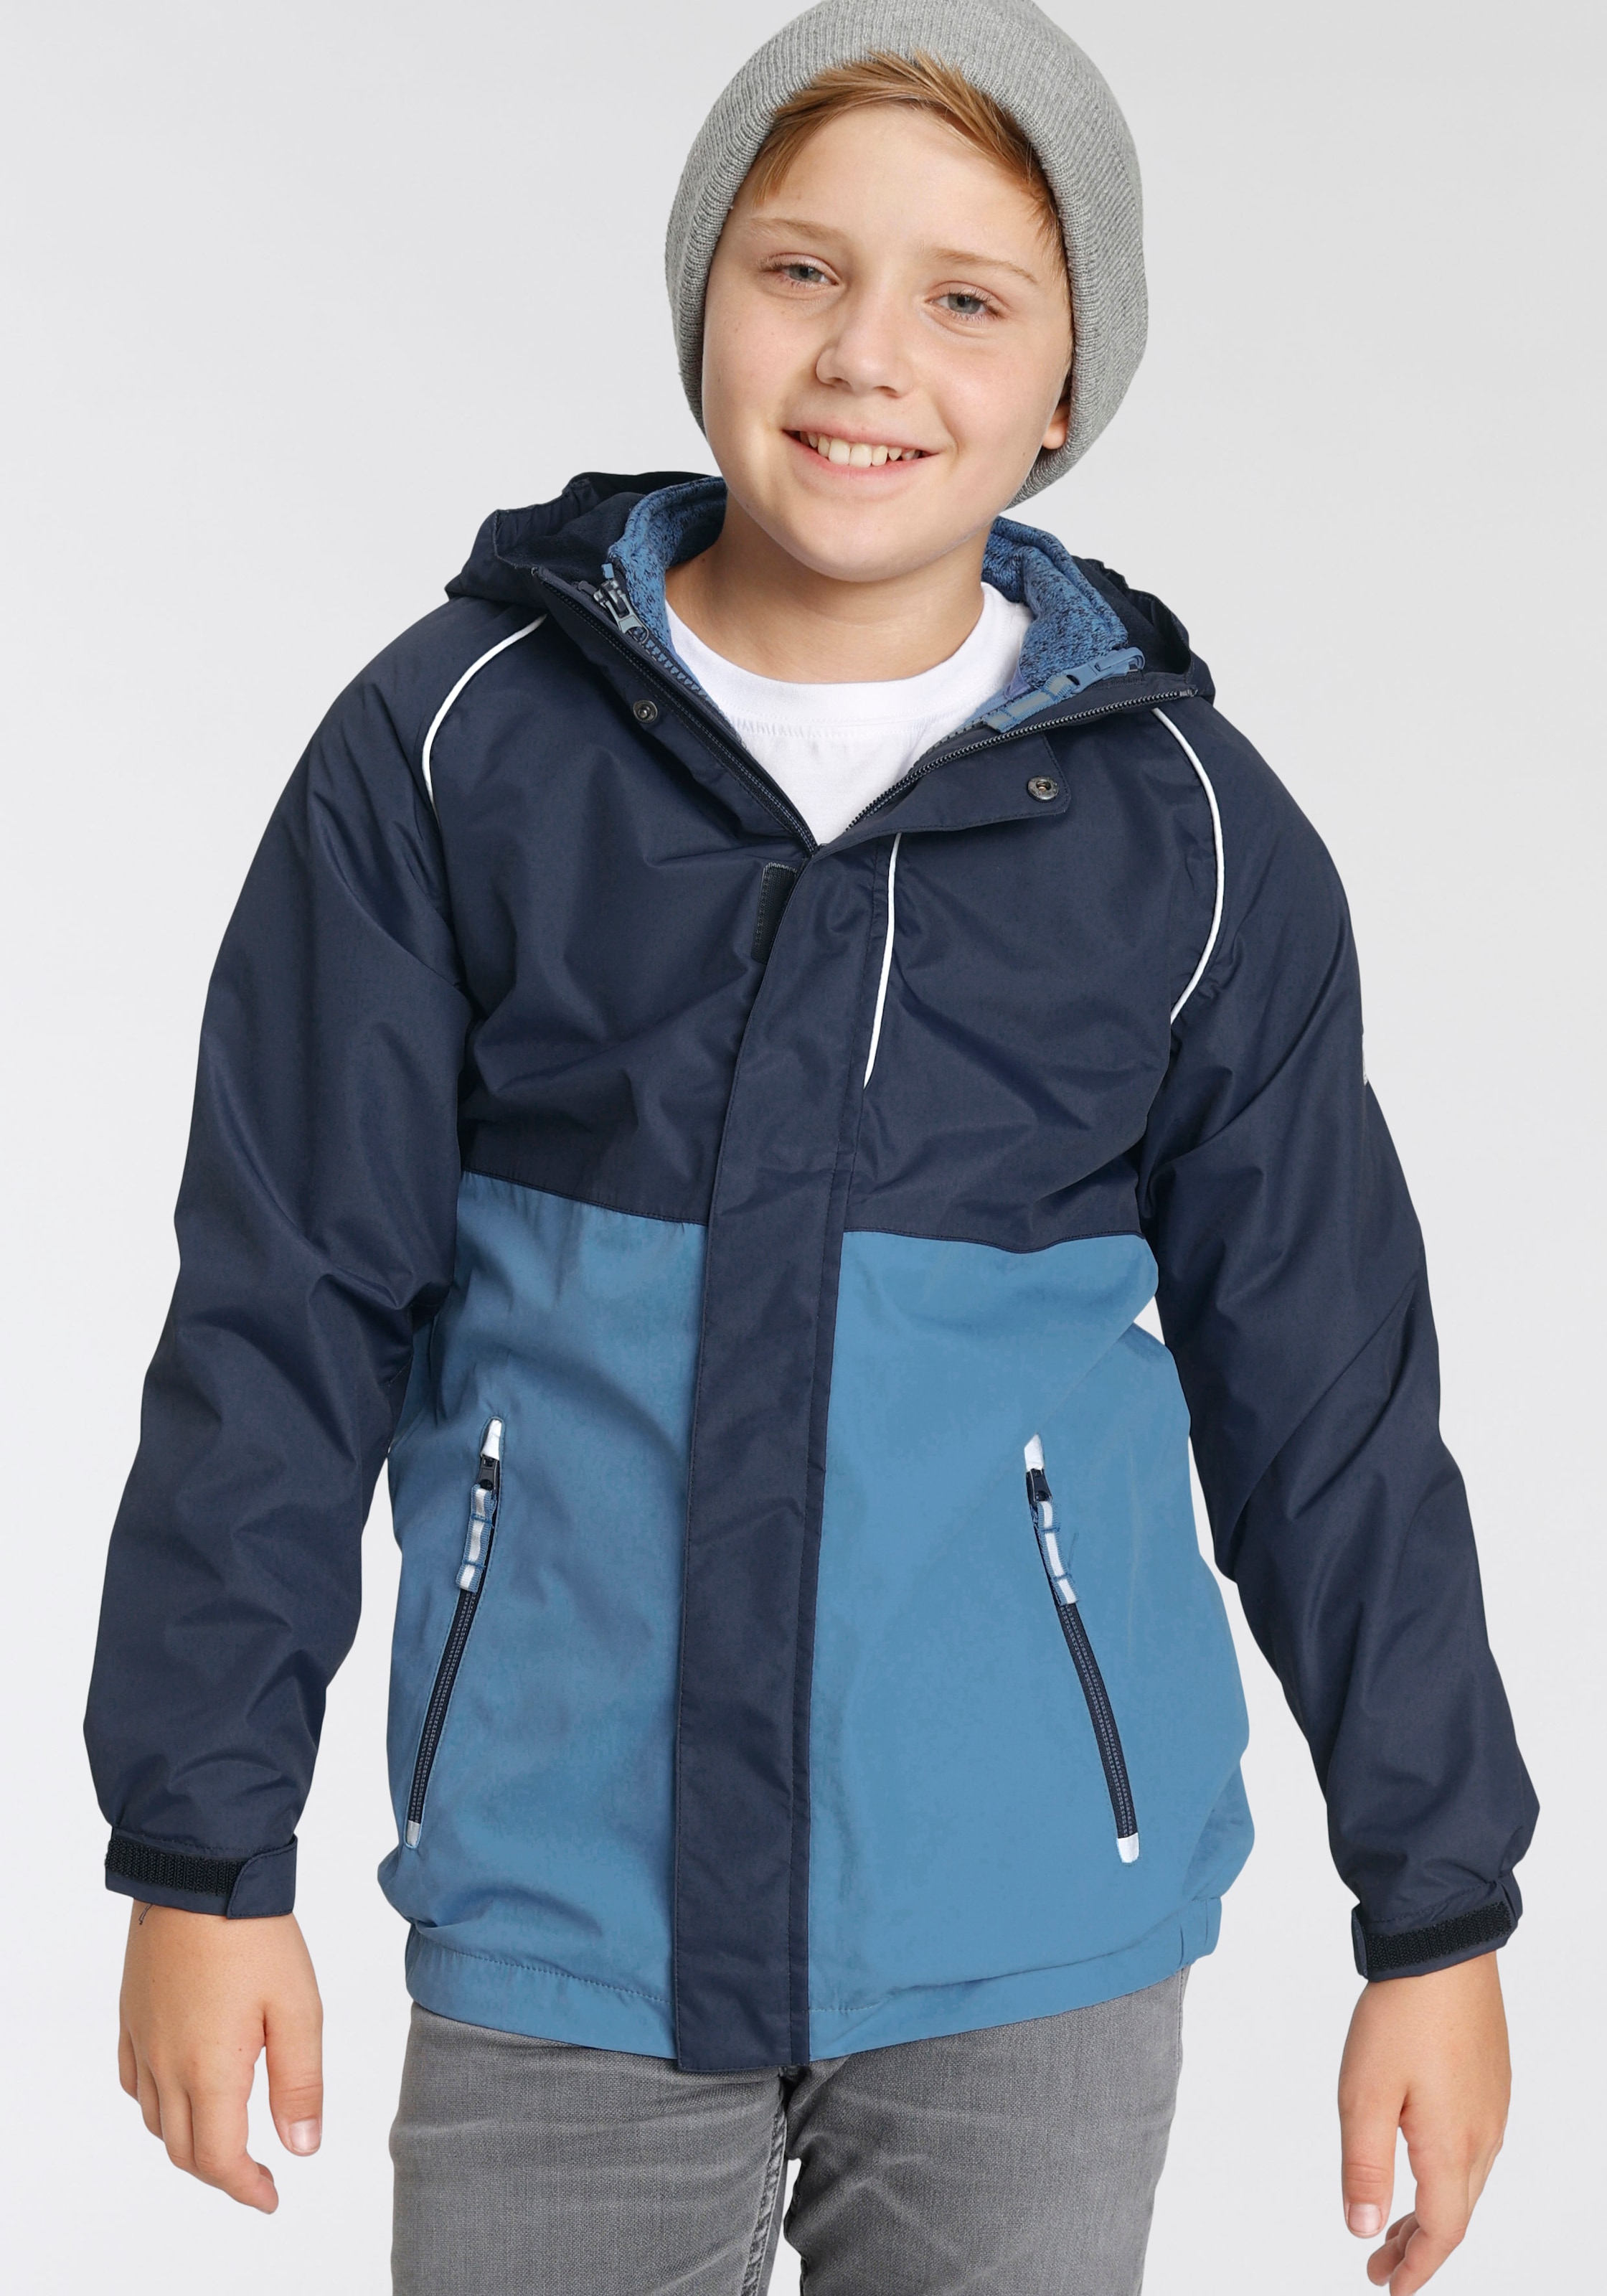 Scout 3-in-1-Funktionsjacke »ALL WEATHER«, (2 Strickfleecejacke mit jetzt Funktionsjacke %Sale mit Kapuze, im St.)